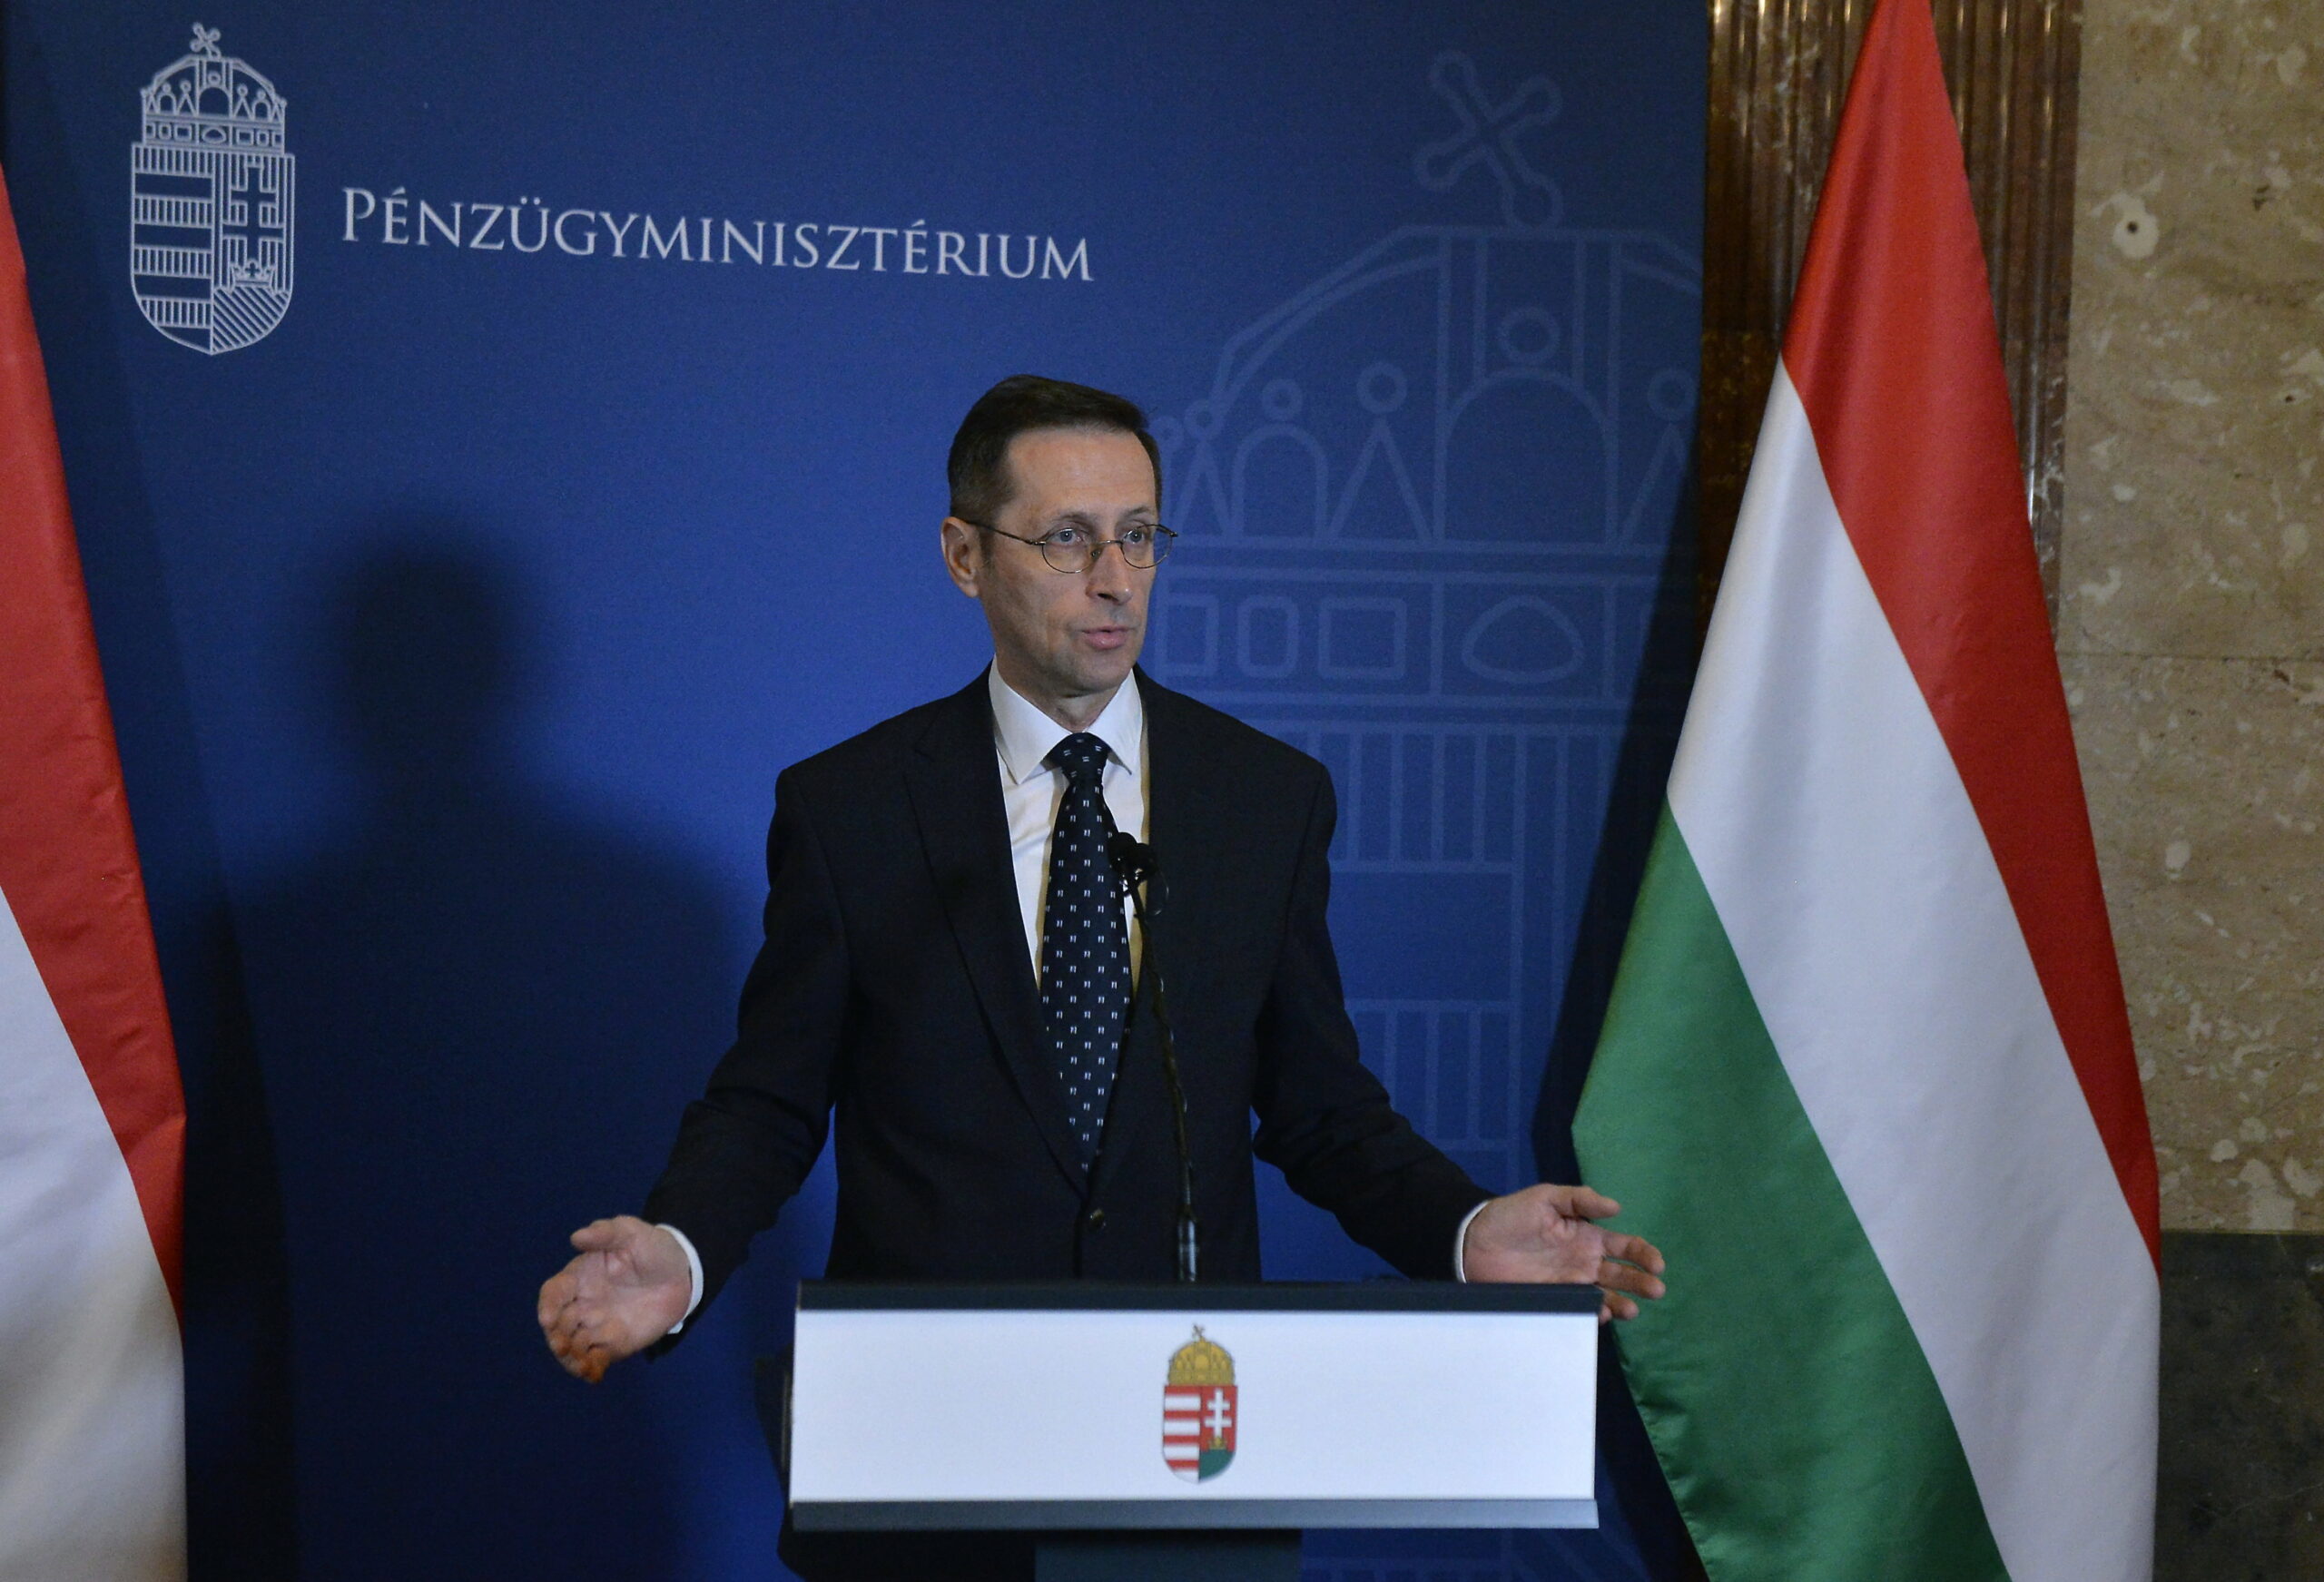 Hungary’s Budget Deficit Reaches Record High amid Russia-Ukraine War